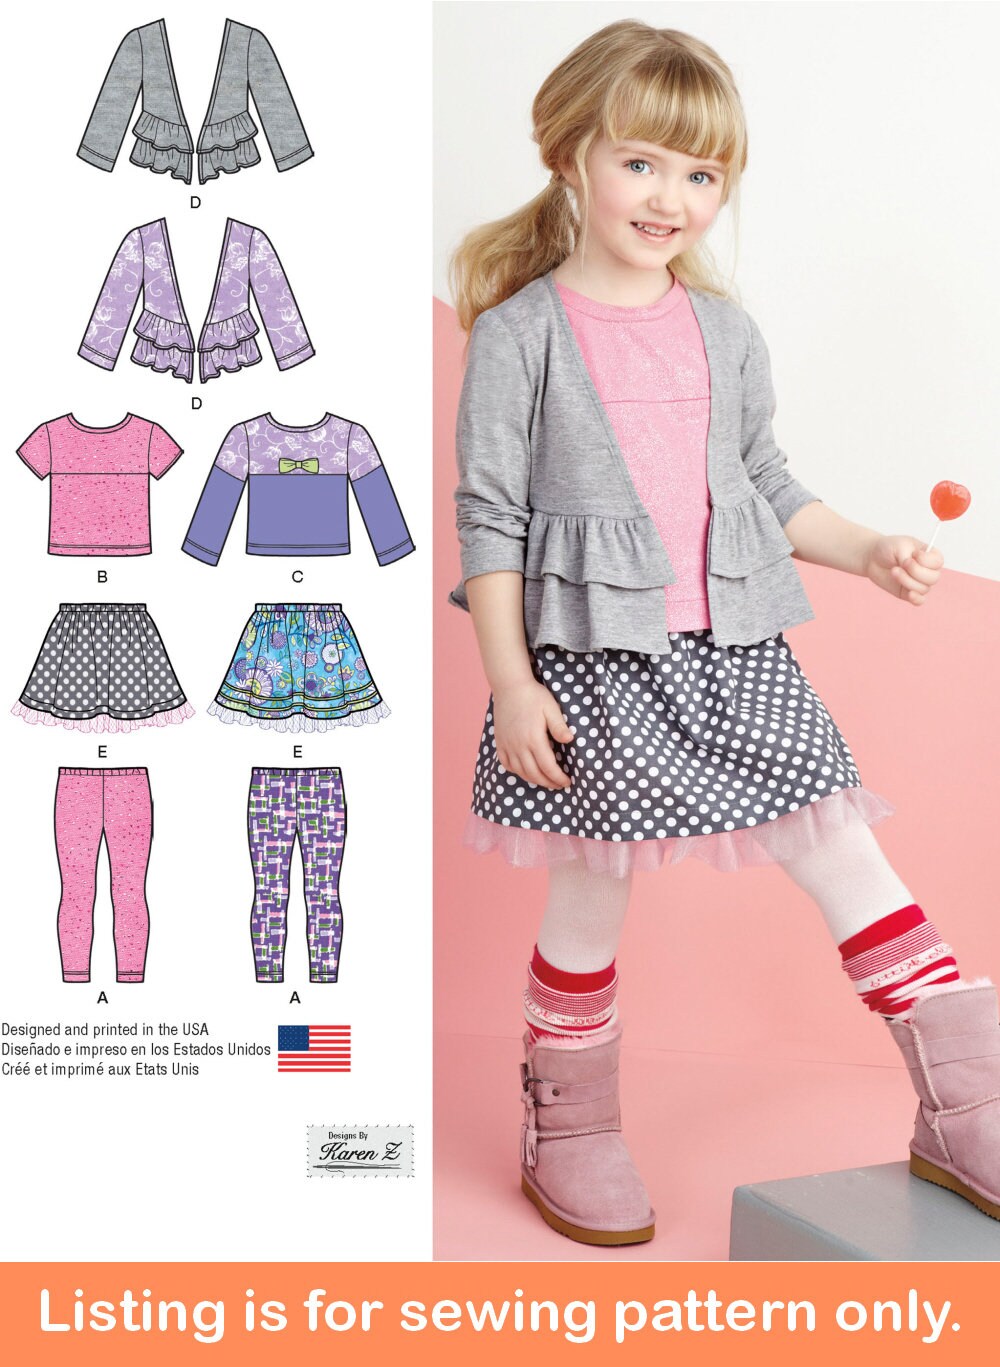 Make Fall Clothes Outfit 8027 Kids Clothing Jacket Shirt Vest Skirt Leggings Child Size 3 4 5 6 7 8 10 12 14 GIRLS SEWING PATTERN